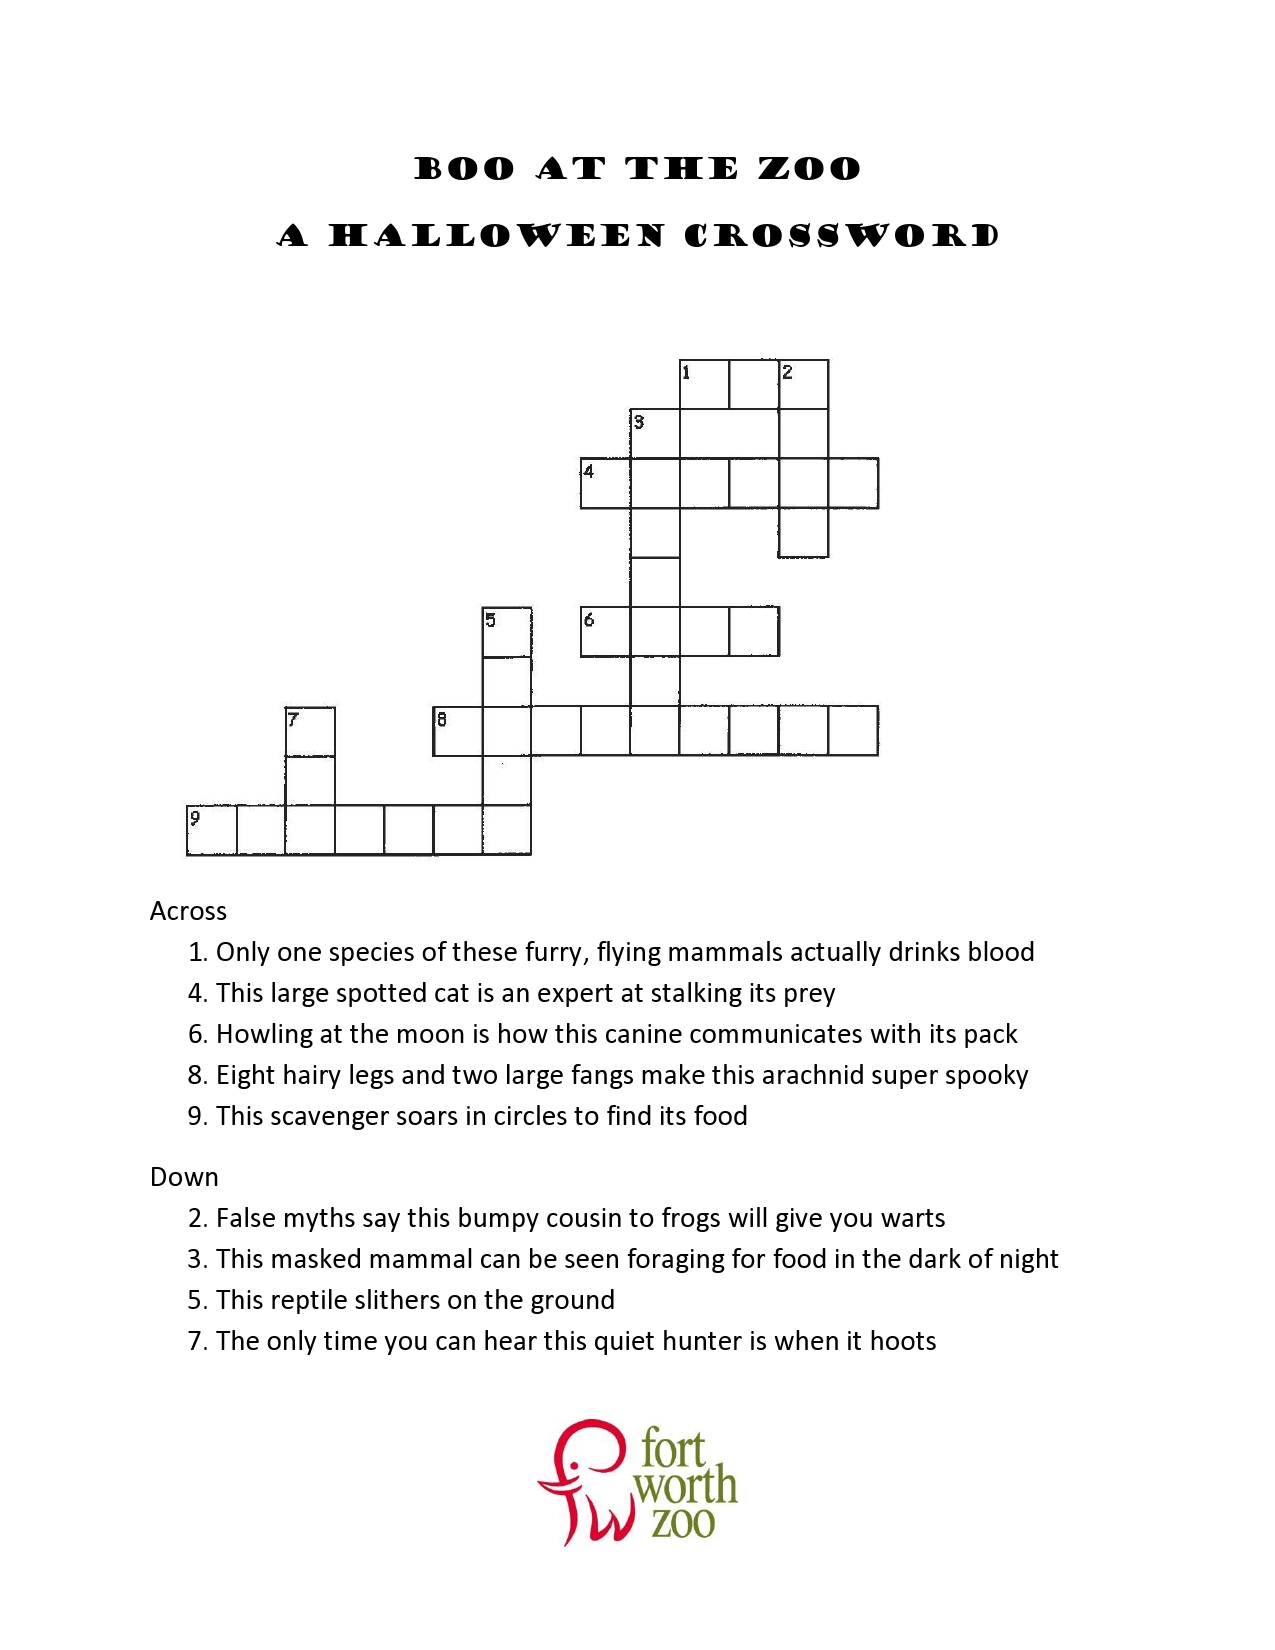 Halloween Crossword Puzzle for 3rd Grade Image